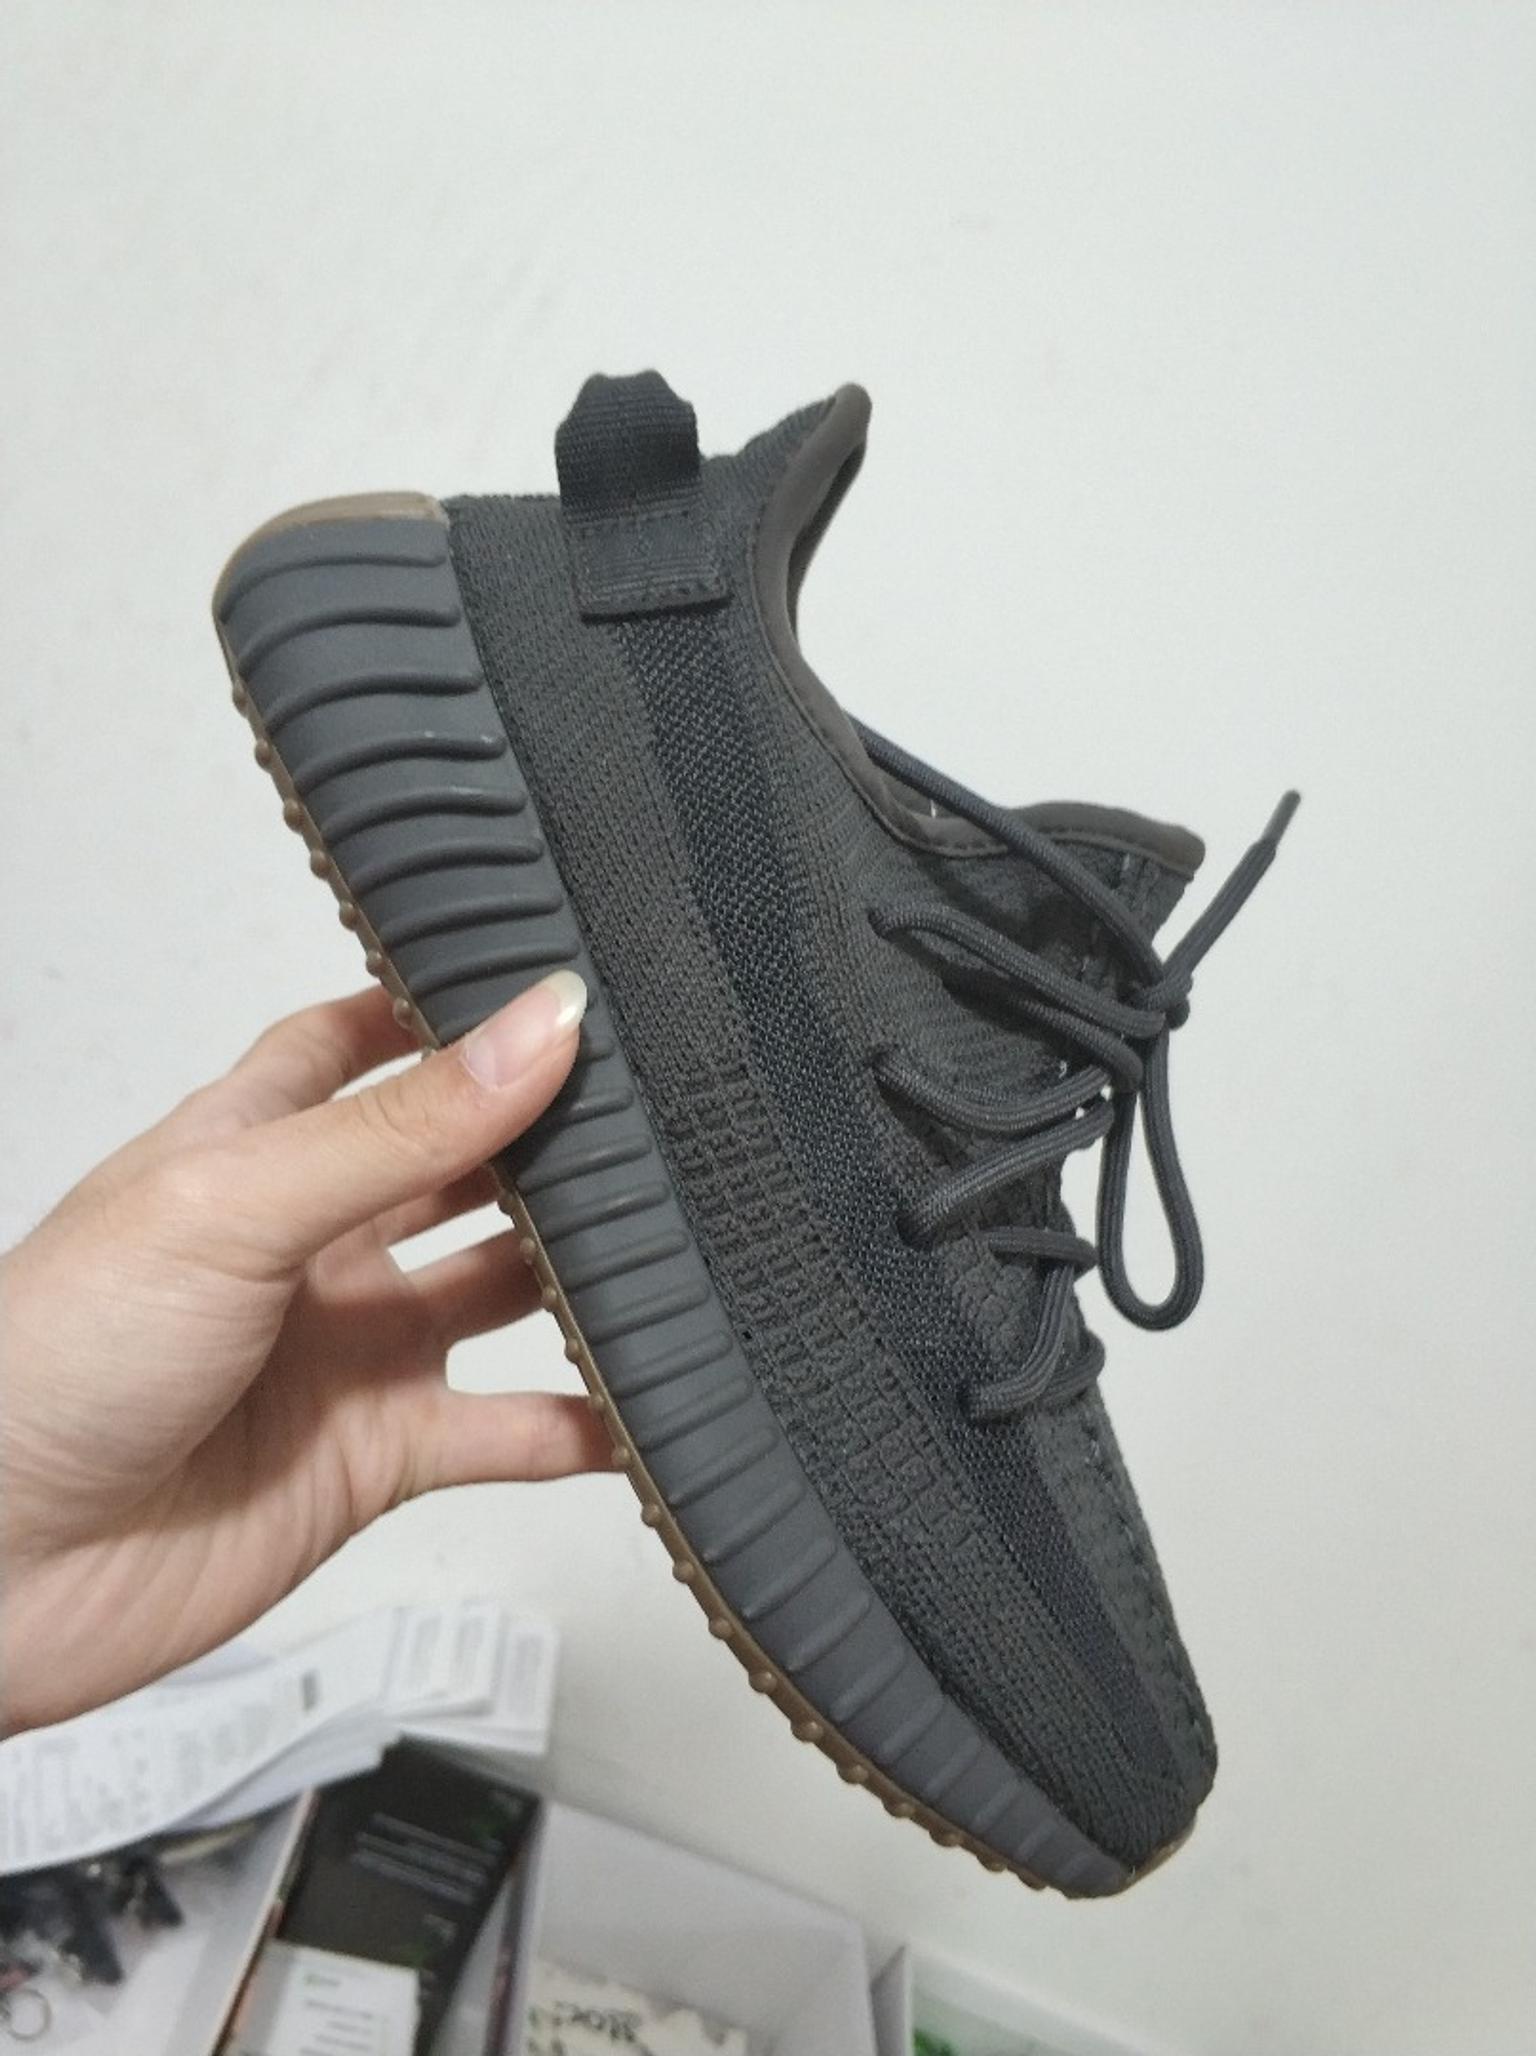 Adidas Yeezy Boost 350 V2 Cinder Replica in 35143 PD for €60.00 for sale |  Shpock